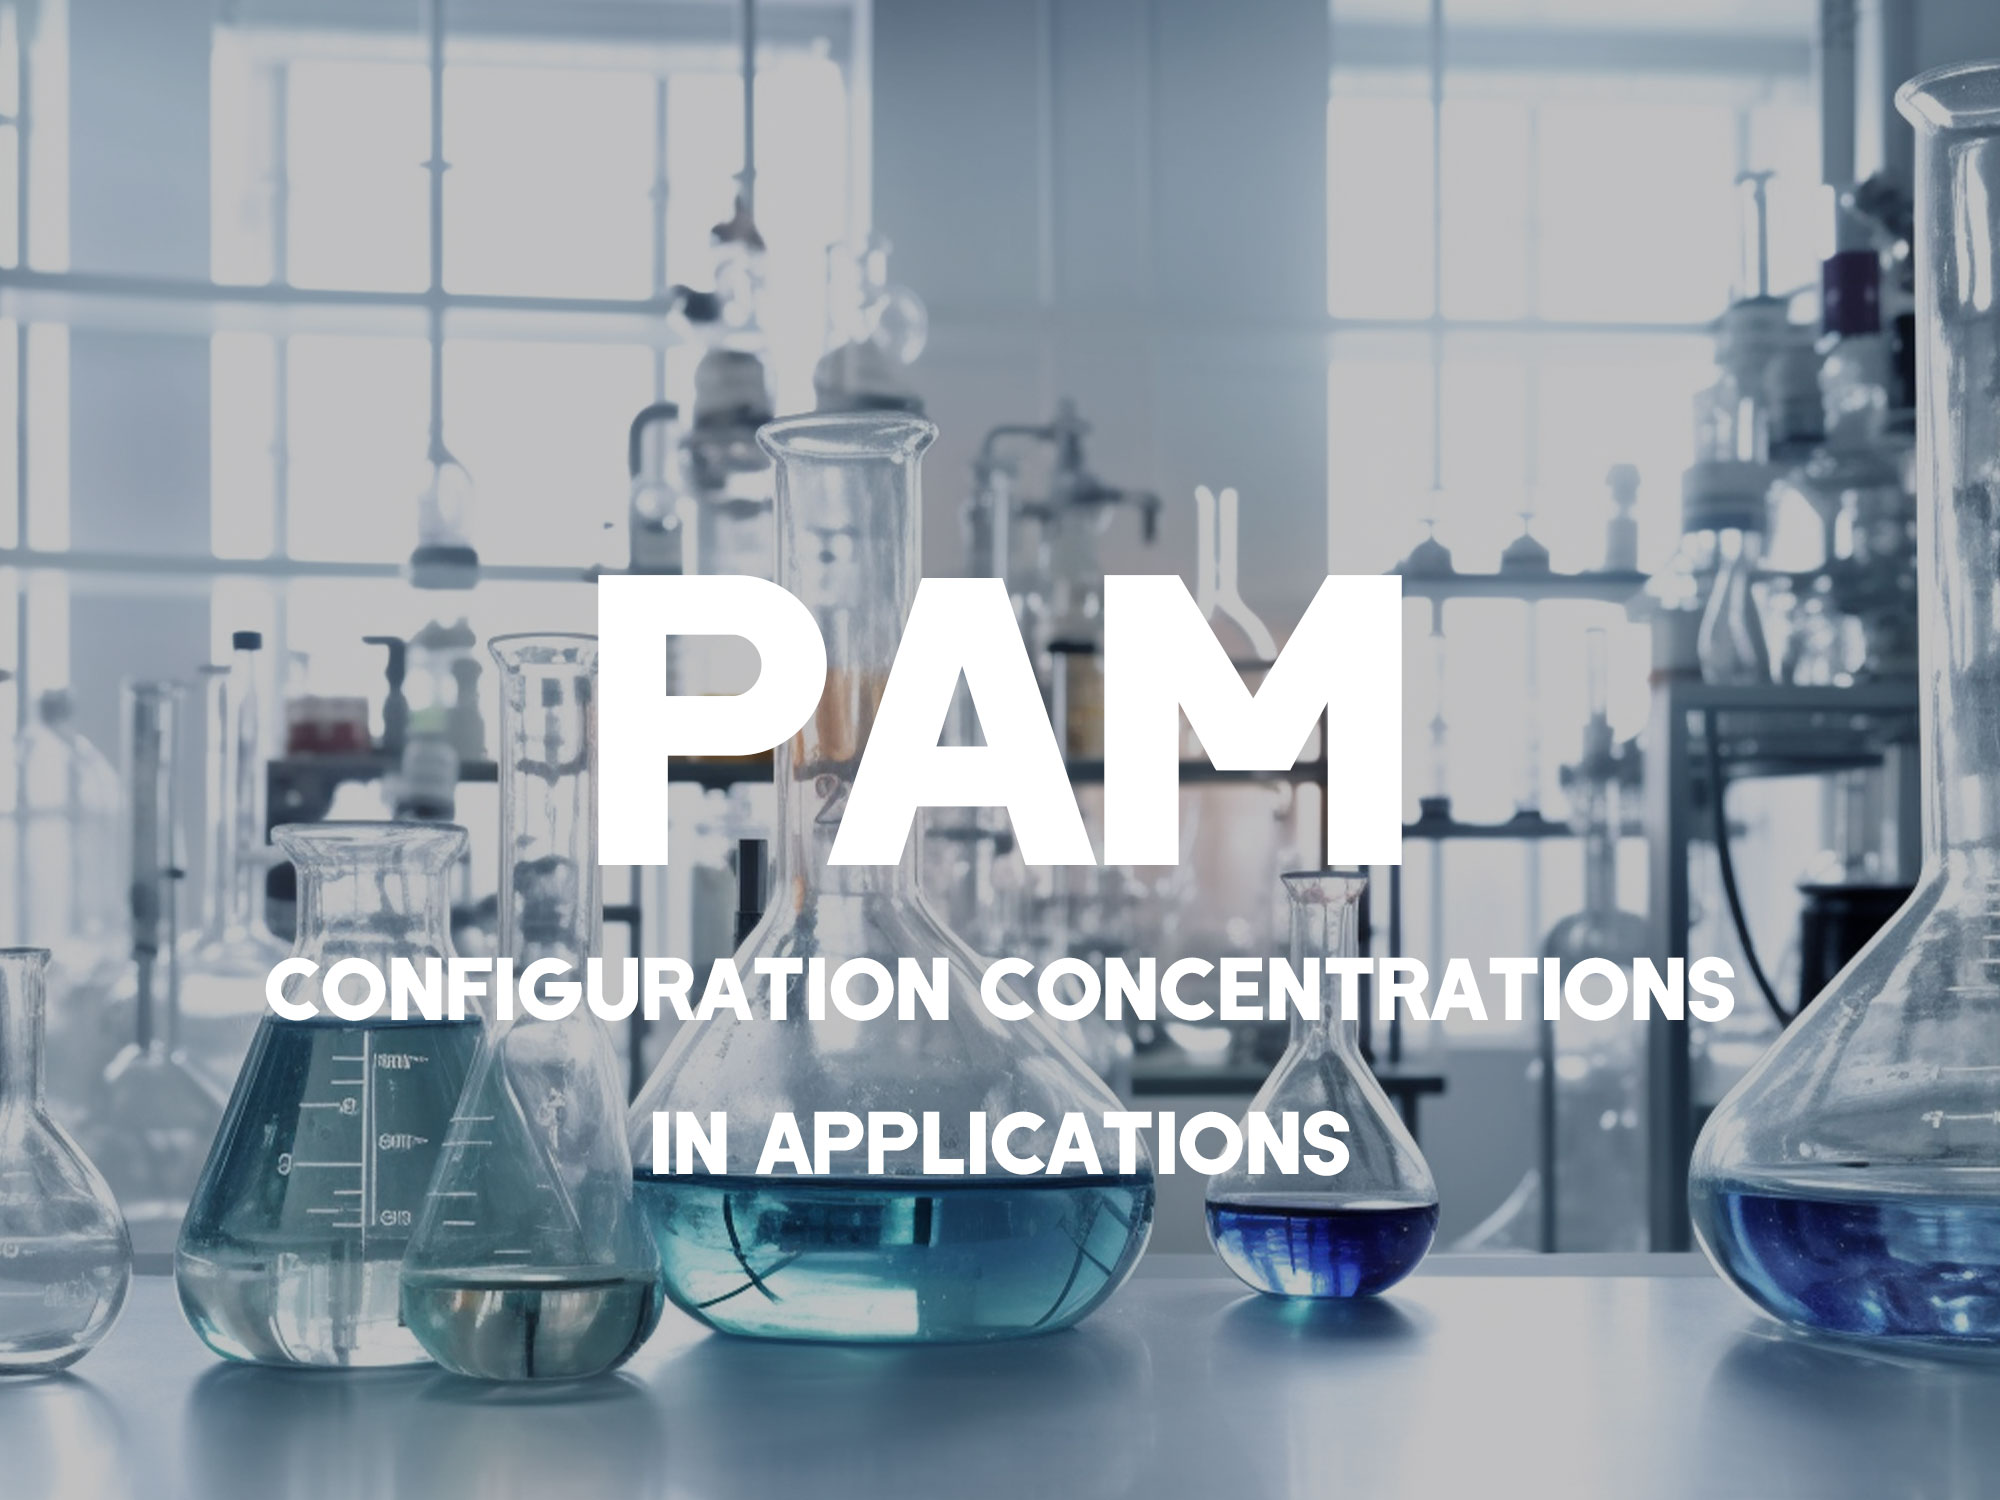 Configuration concentrations for anionic polyacrylamide applications